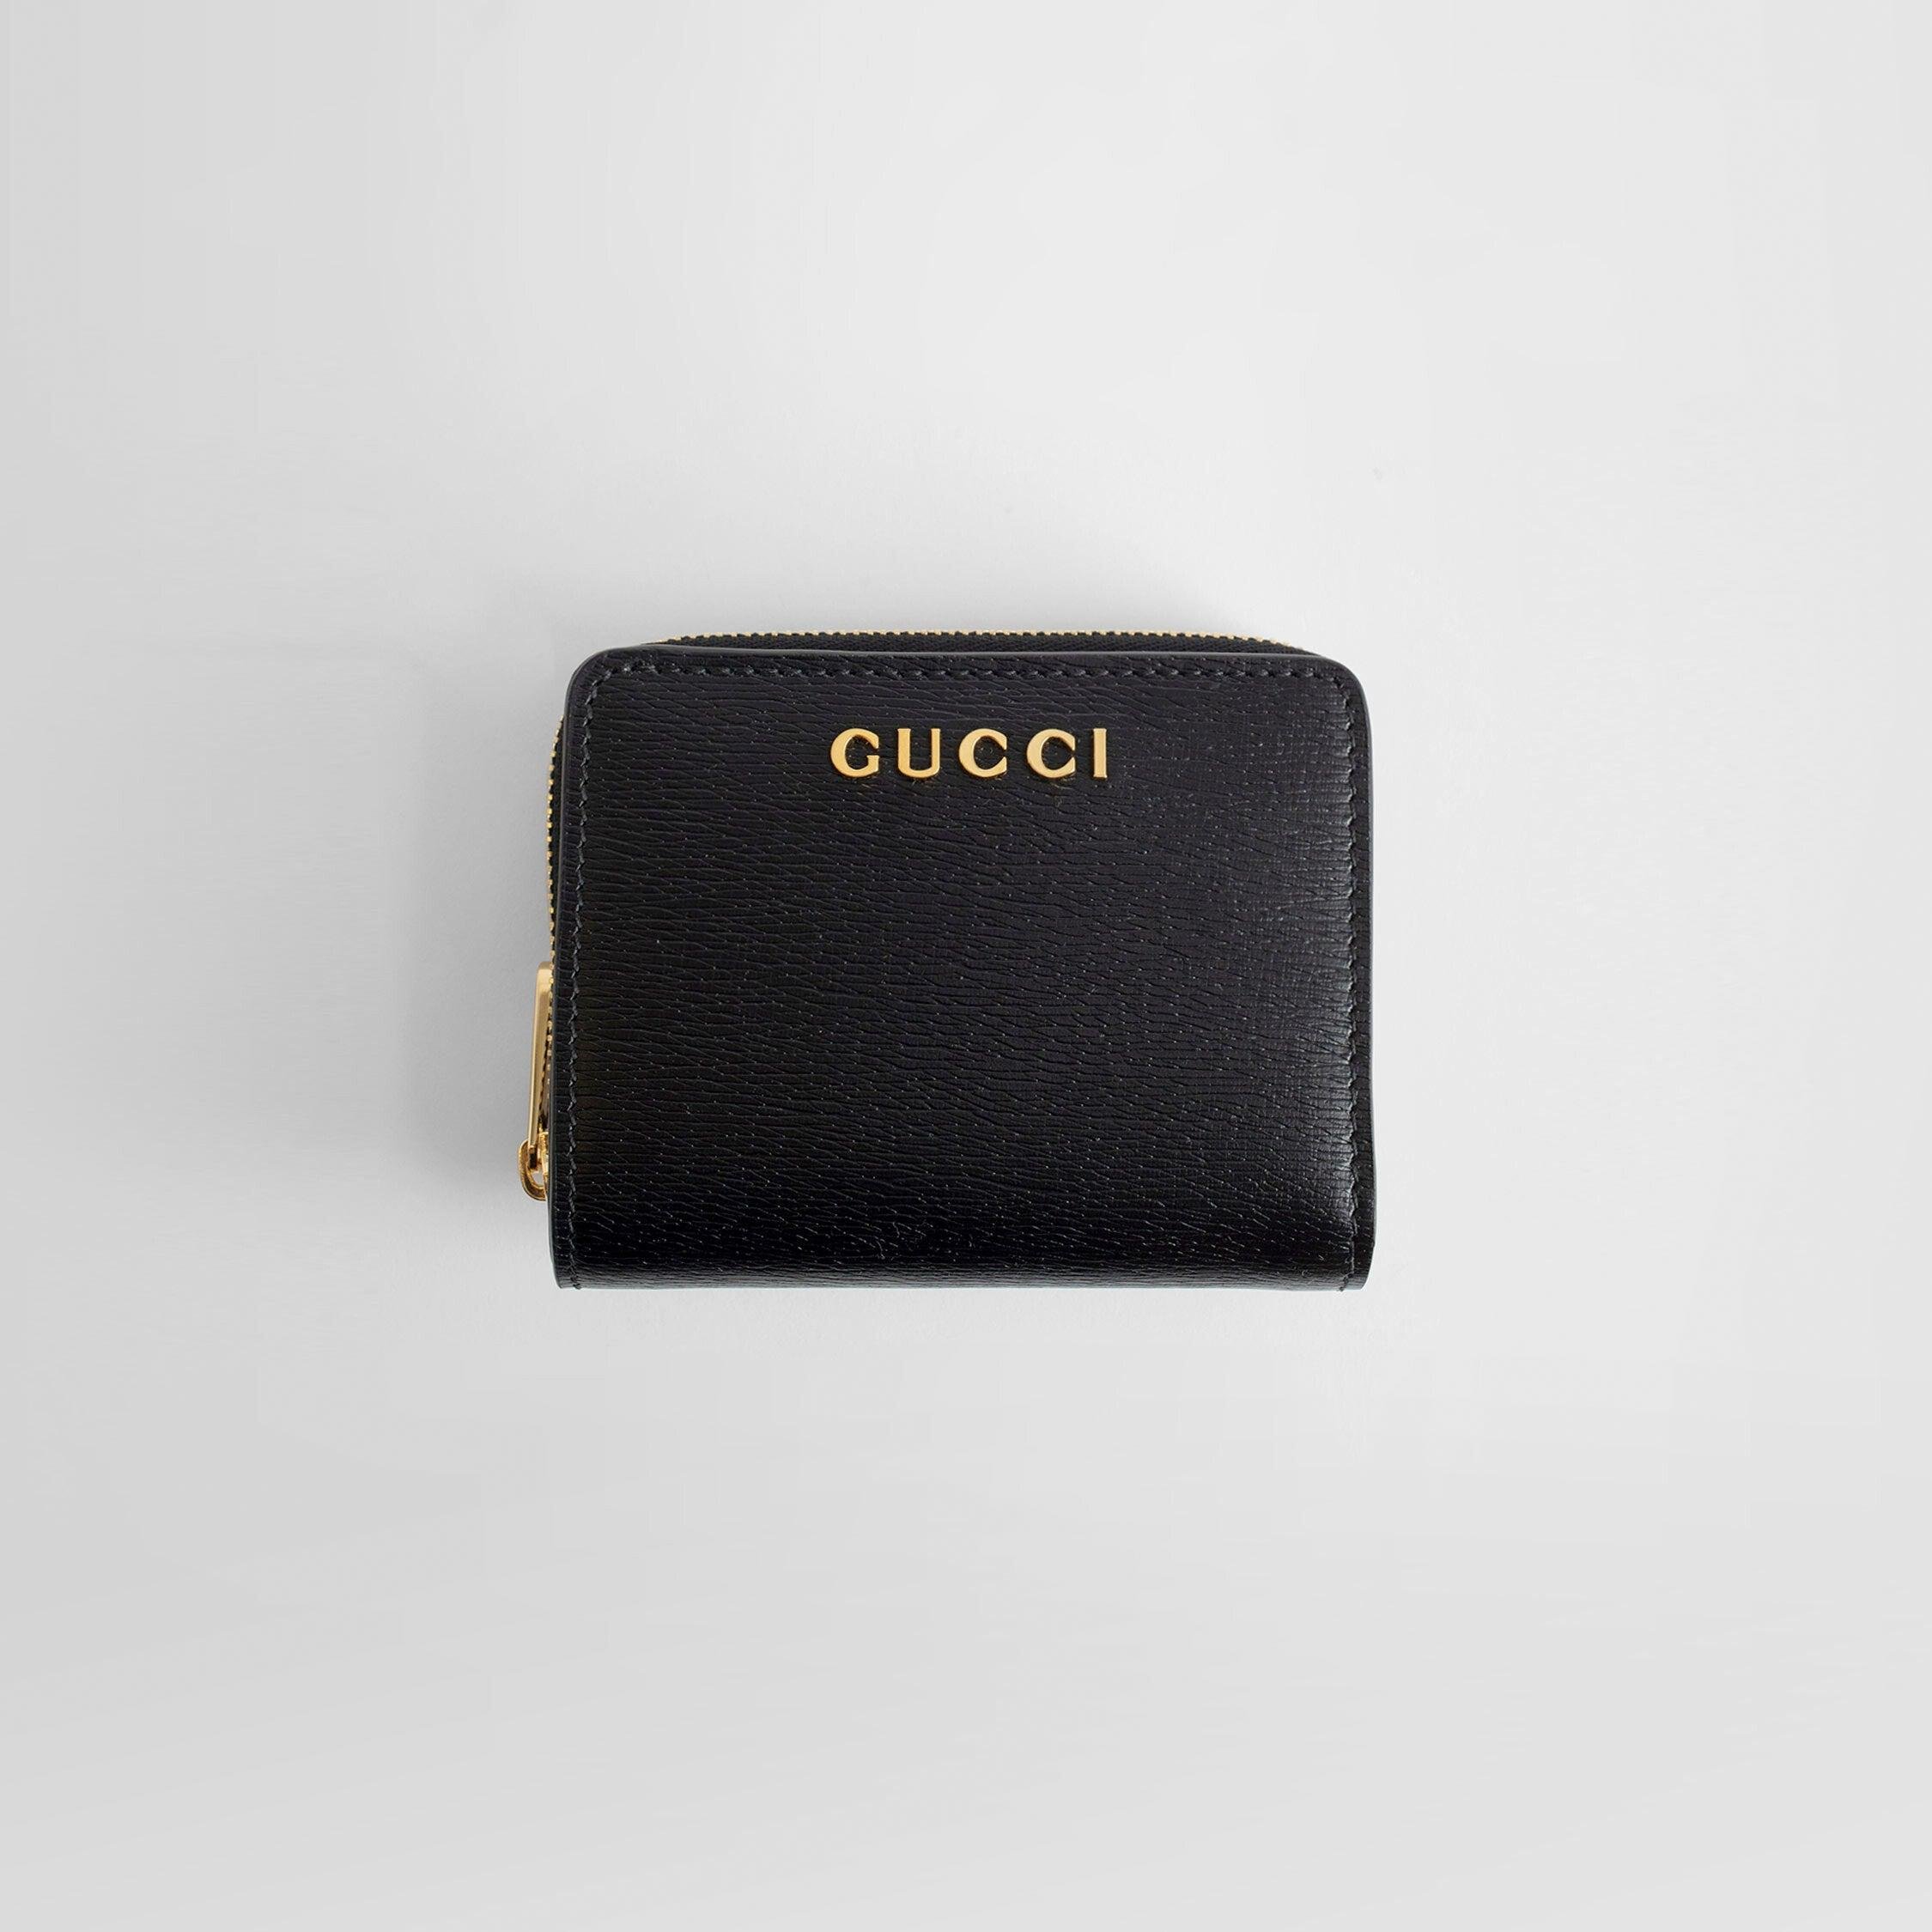 GUCCI WOMAN BLACK WALLETS & CARDHOLDERS by GUCCI